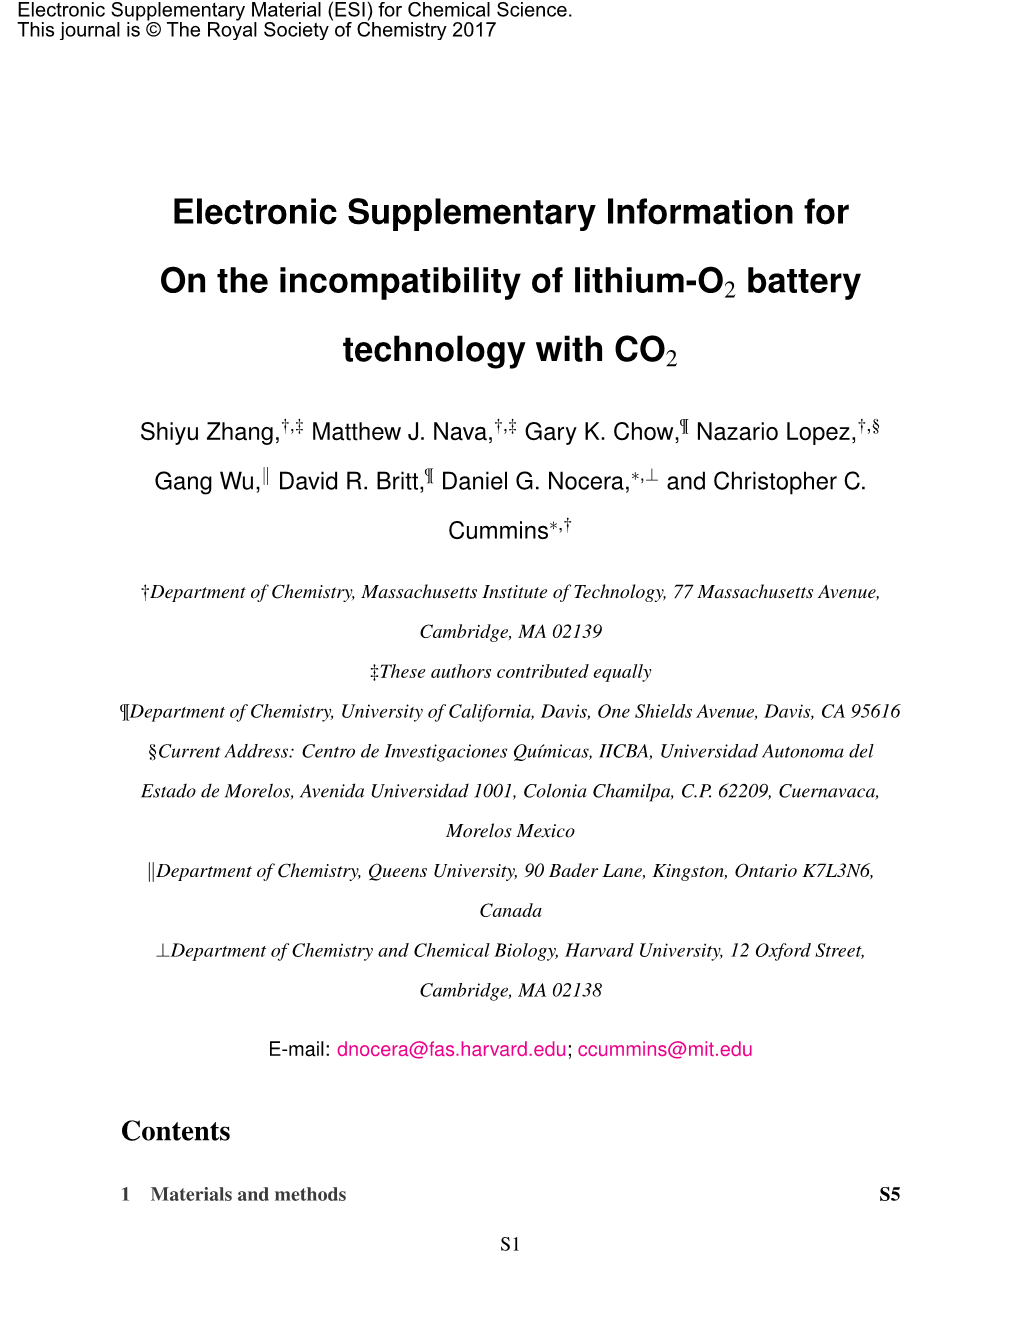 Electronic Supplementary Information for on the Incompatibility of Lithium